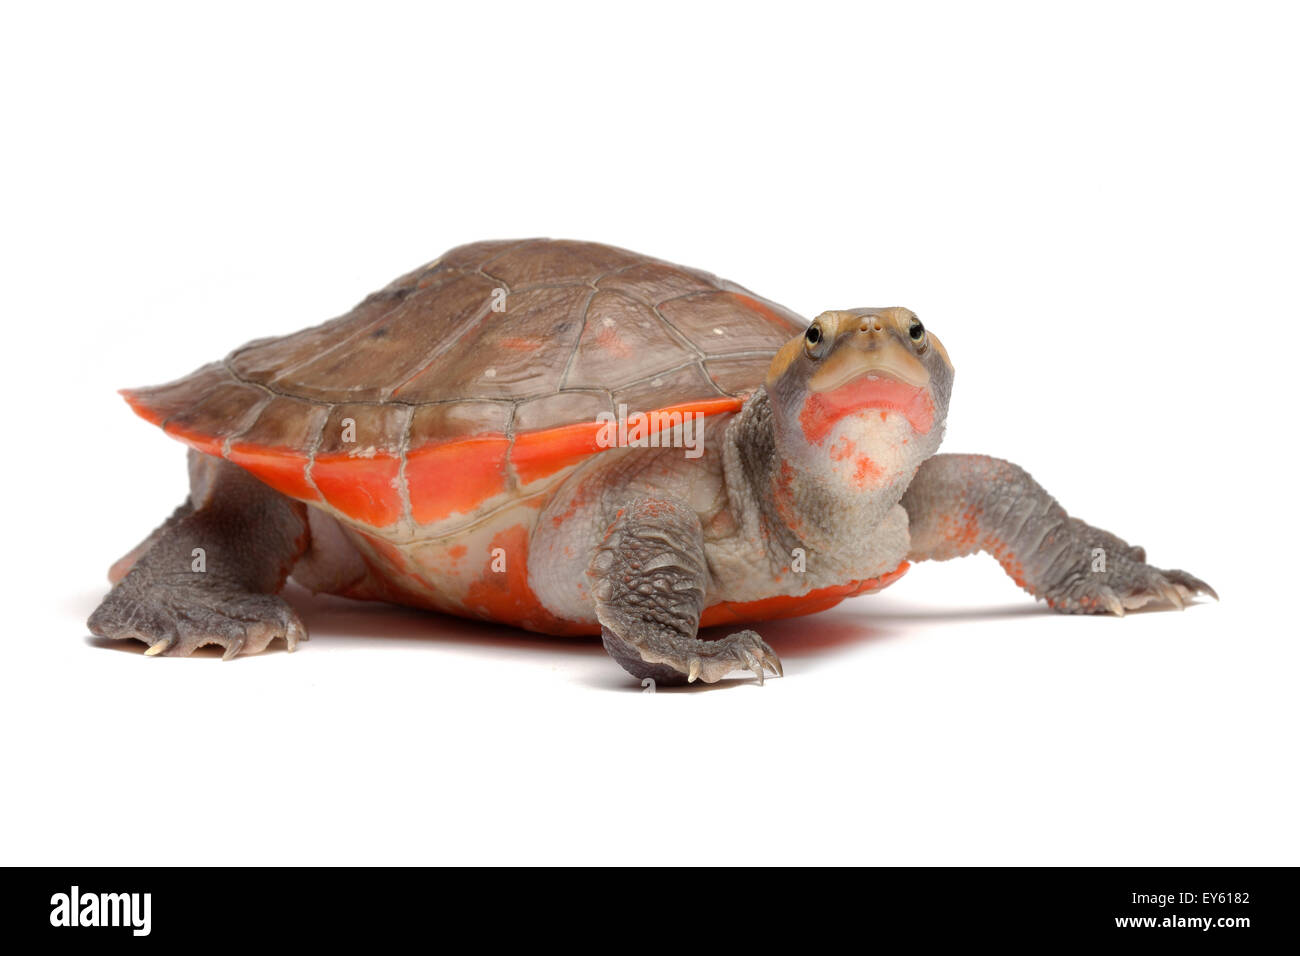 Red-bellied Short-necked Turtle on white background Stock Photo